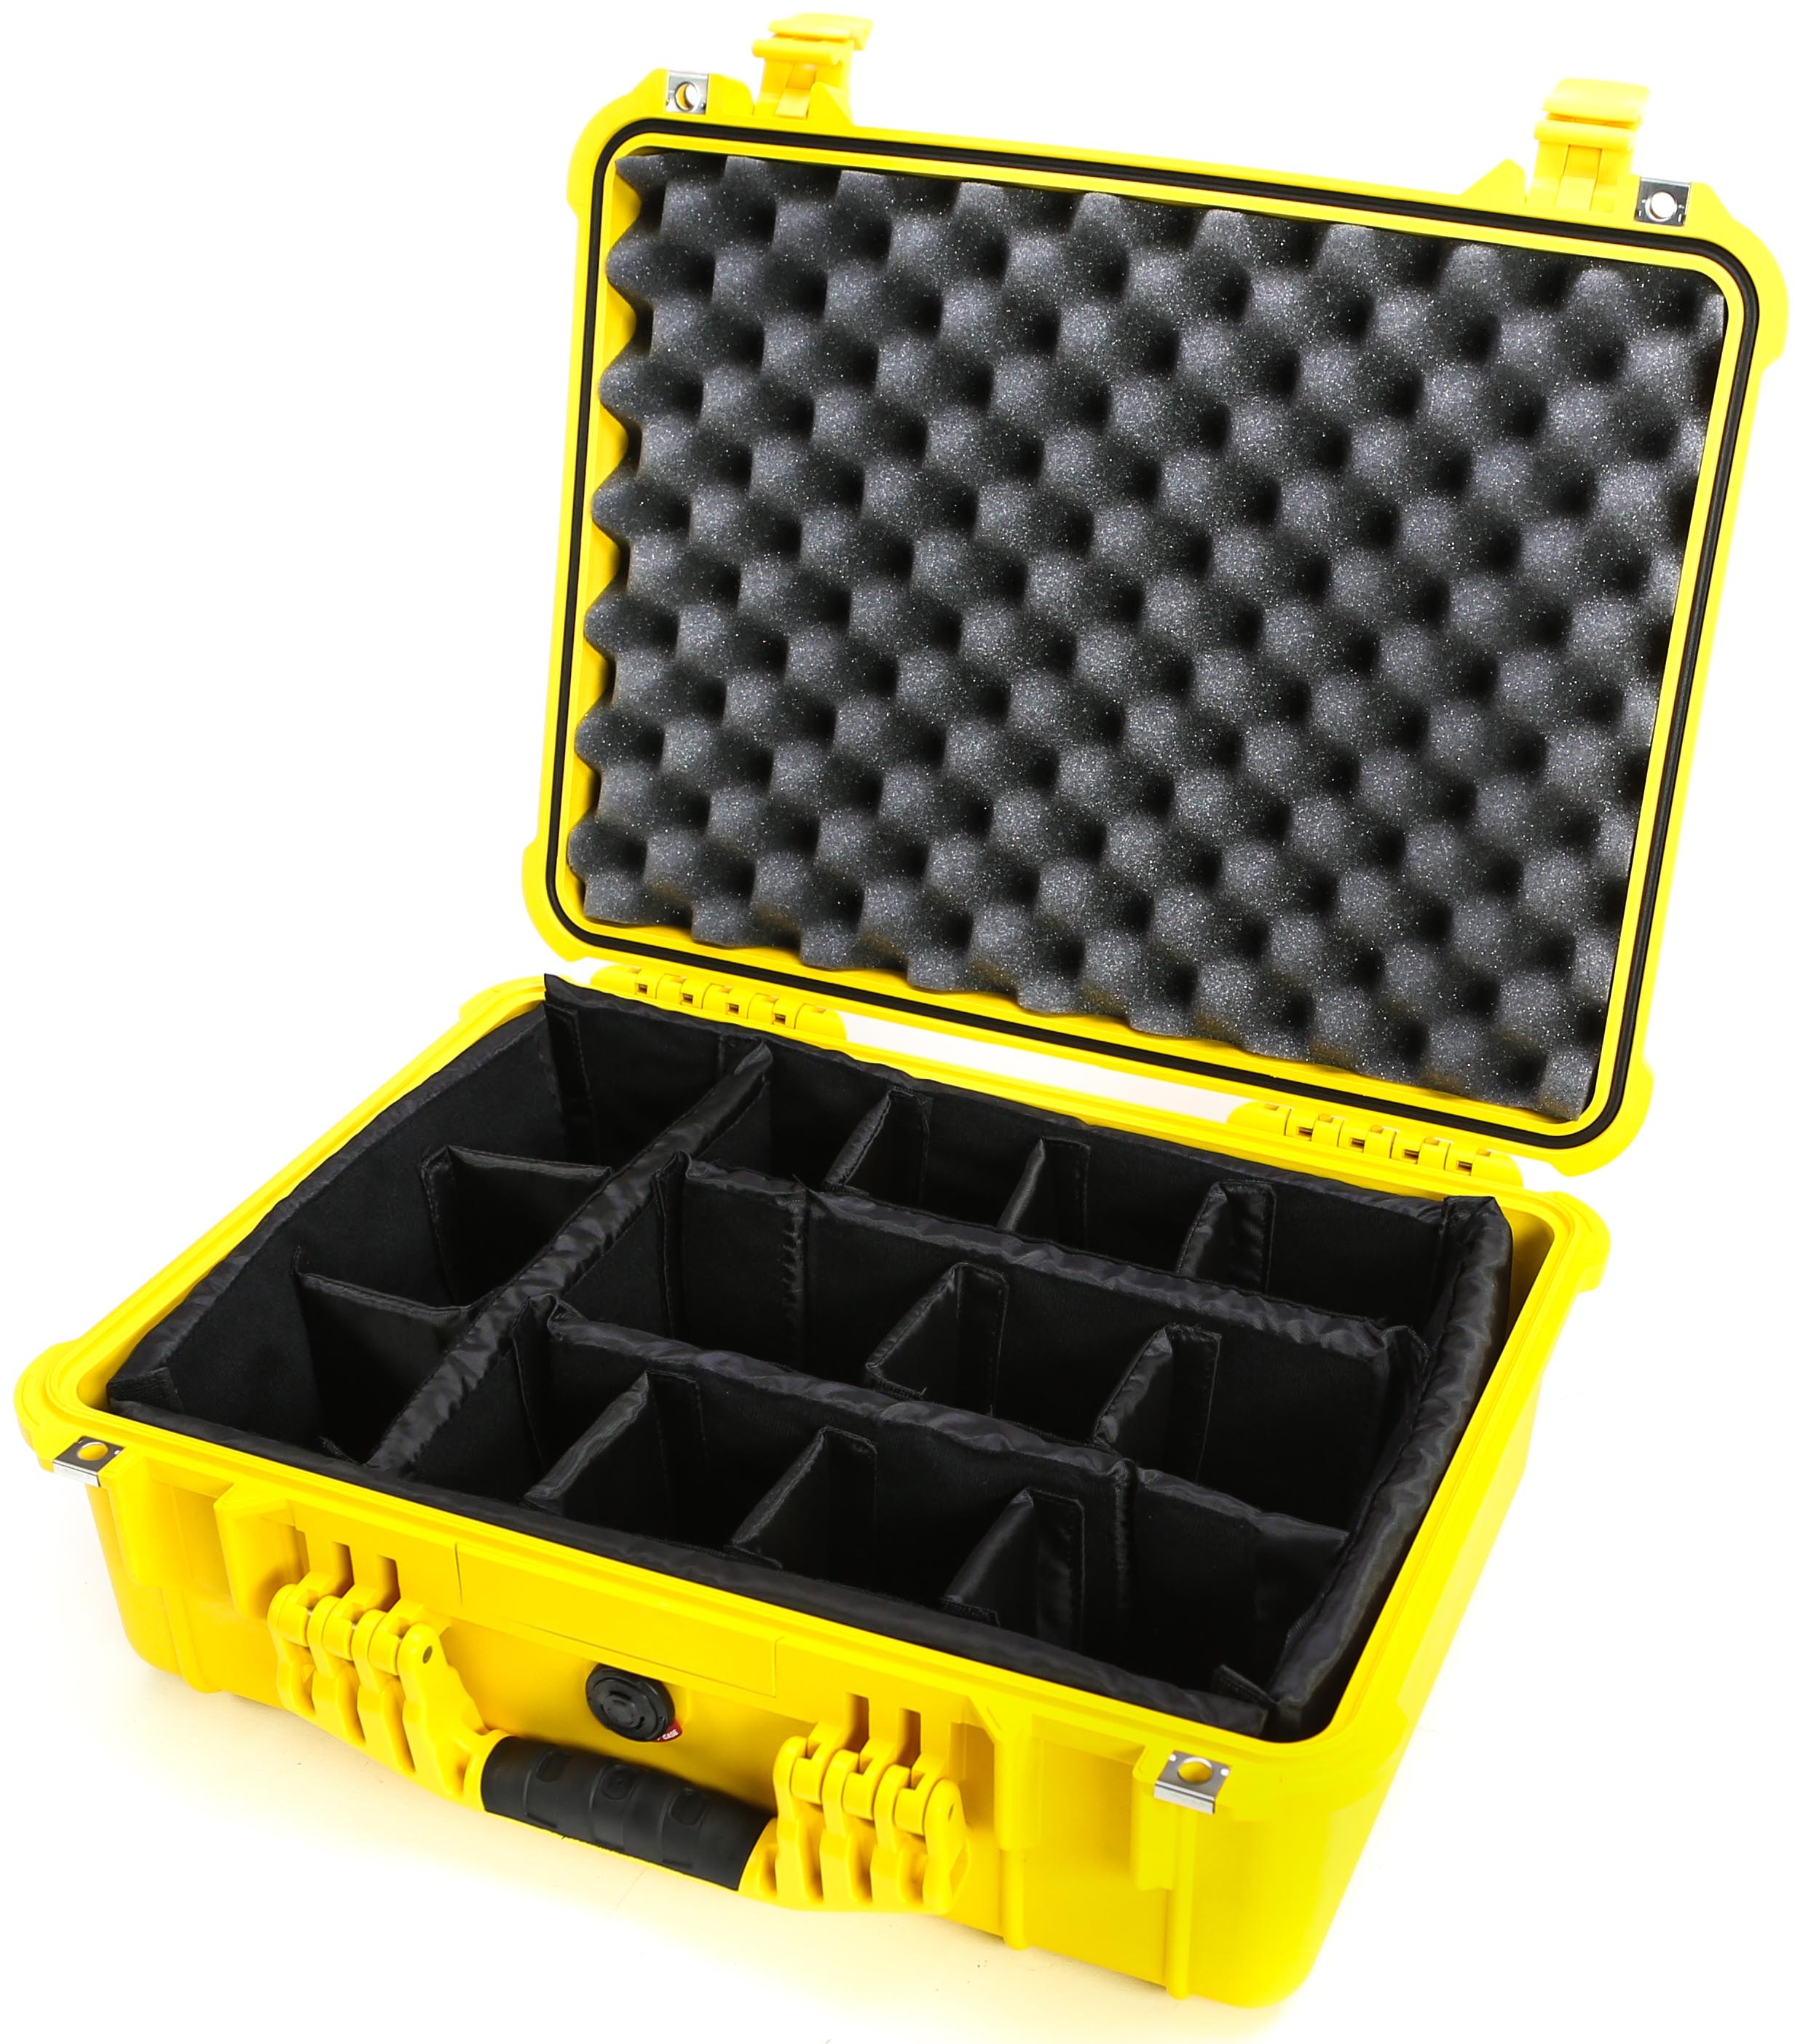 Pelican 1524 Case with Padded Dividers (Yellow)